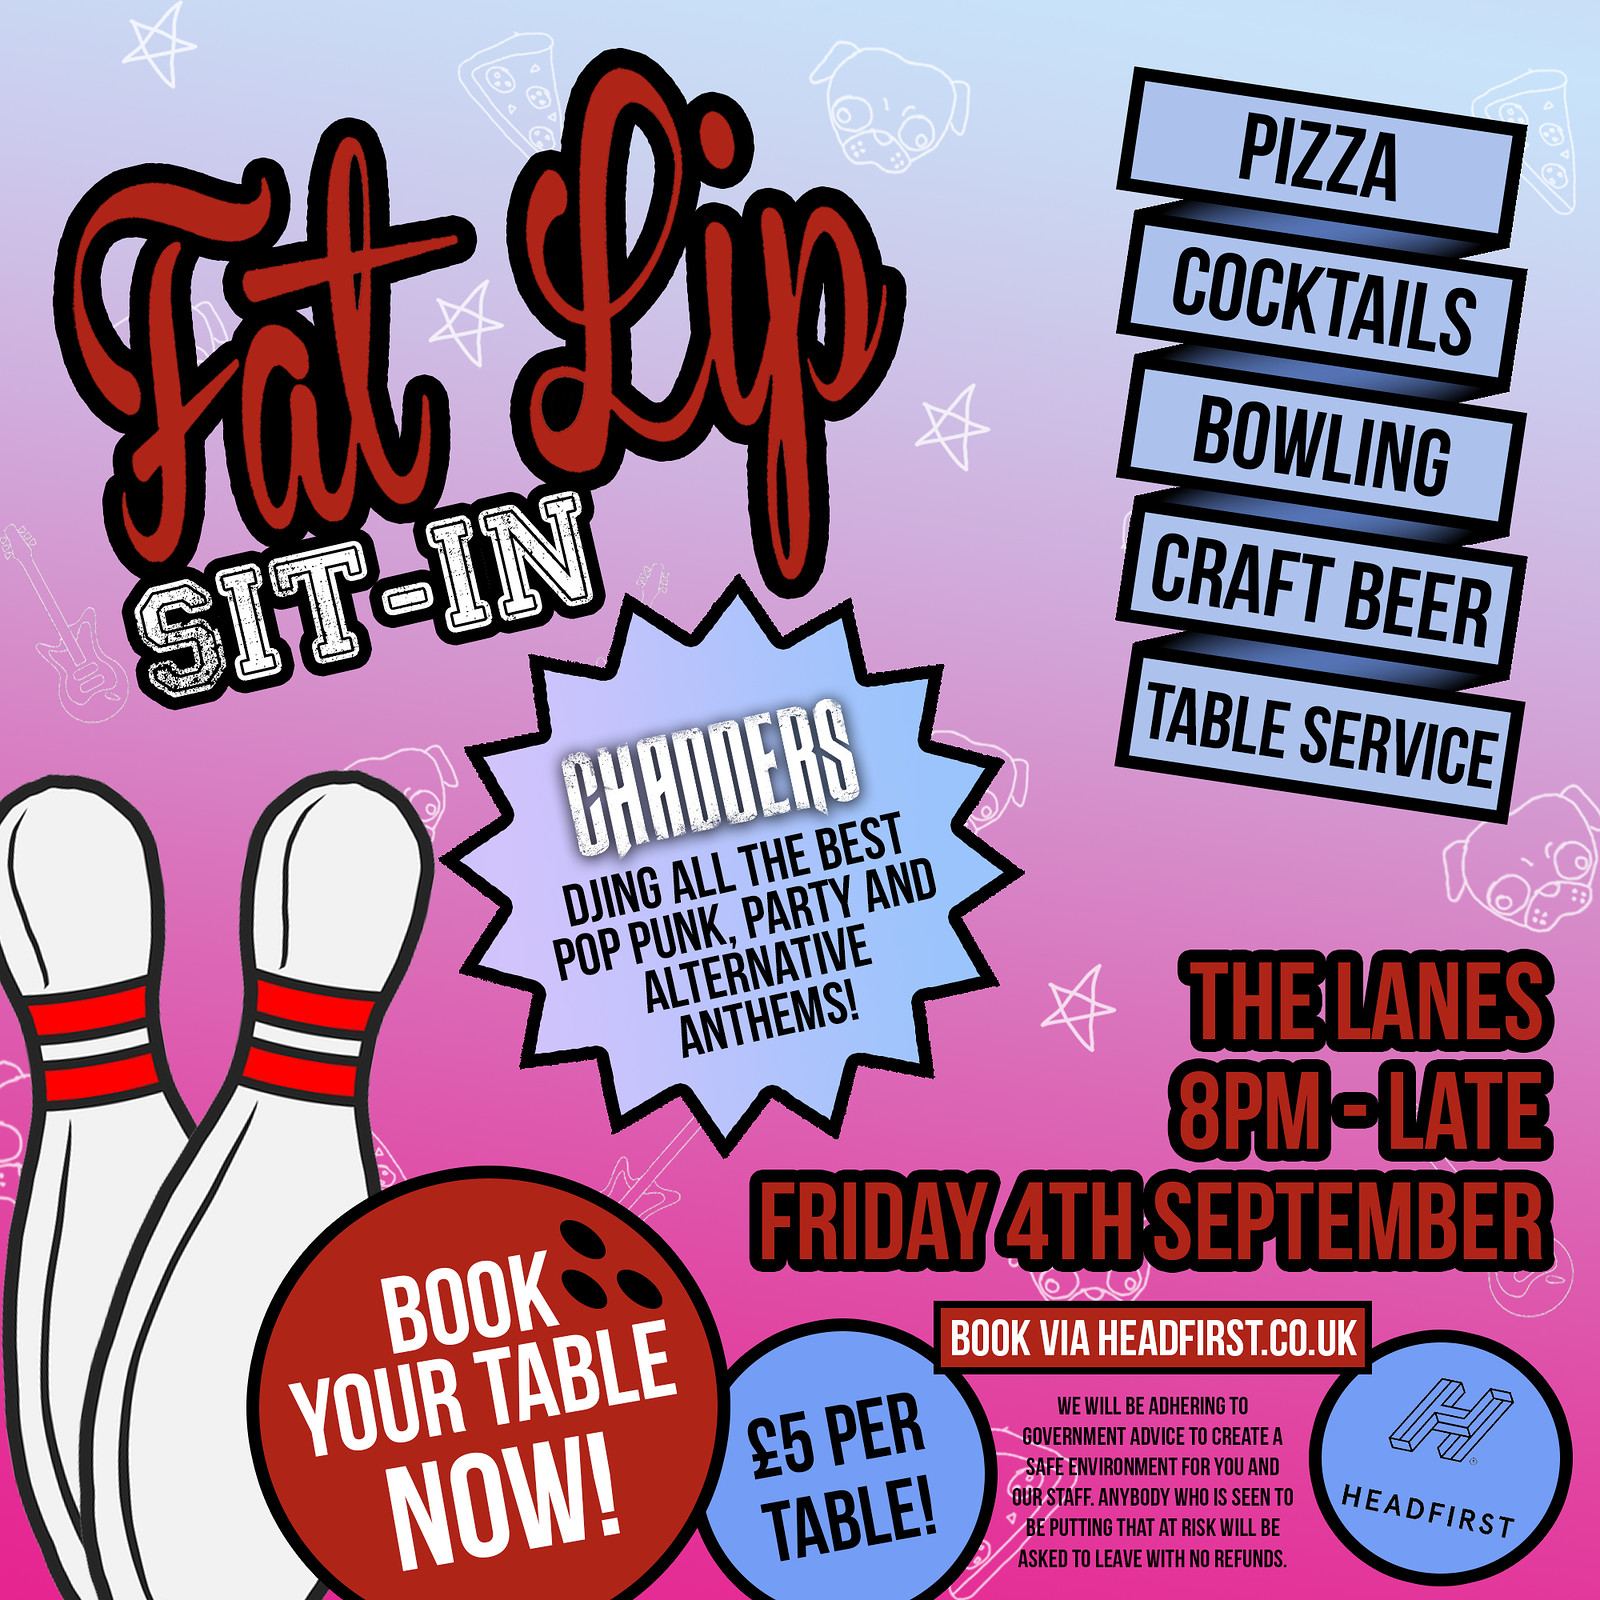 Fat Lip Sit-In at The Lanes